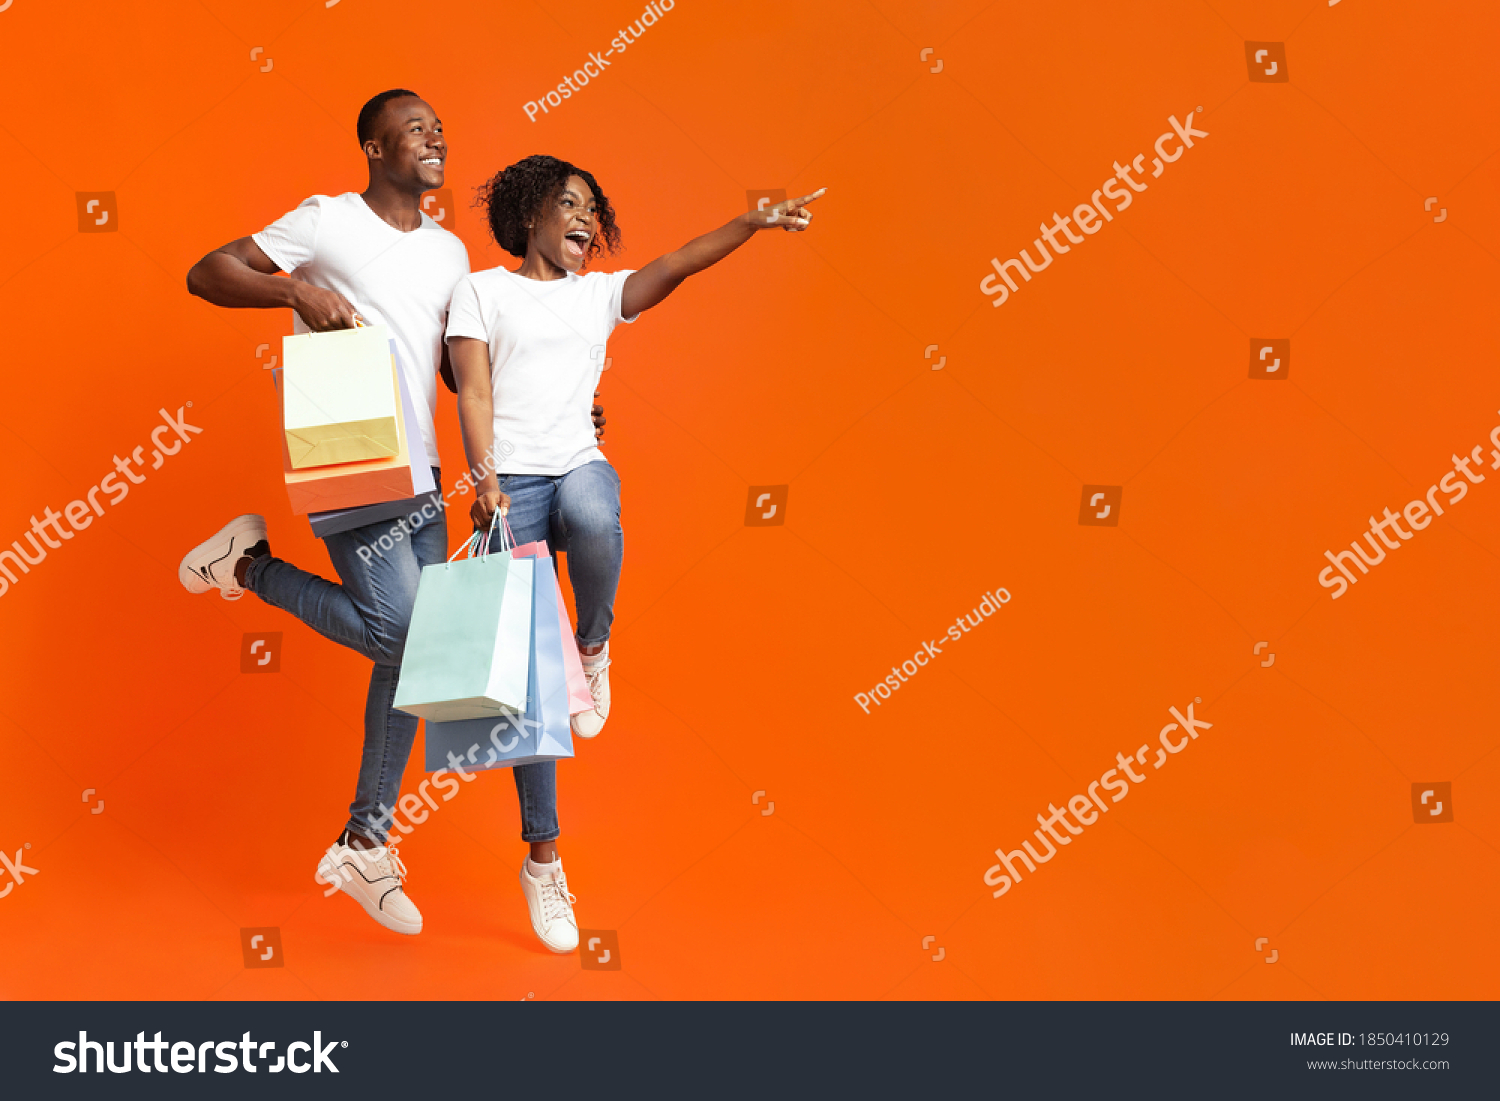 Emotional african-american couple with purchases jumping up and cheerfully pointing away at empty space, orange studio background. Happy young black man and woman aiming at advertisement #1850410129